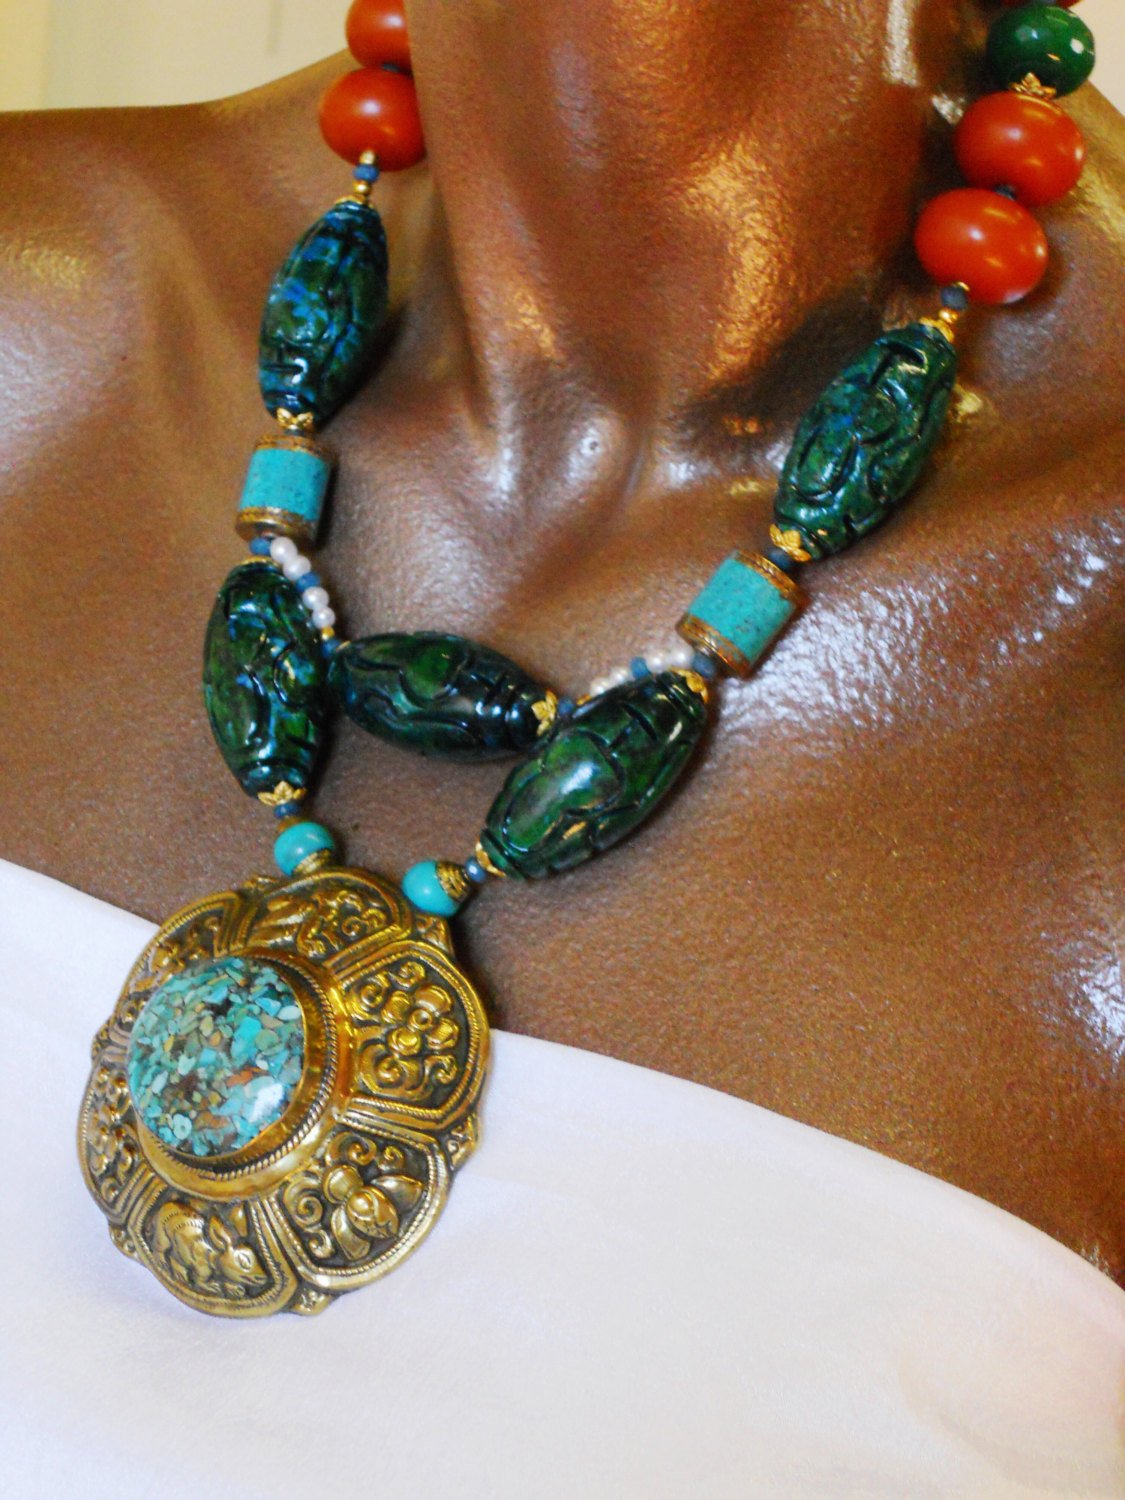 Mosaic Turquoise Dark Orange Amber Green Chrysocolla Pearl Brass Repousee Statement Necklace, NRR1532 SaRa Necklace